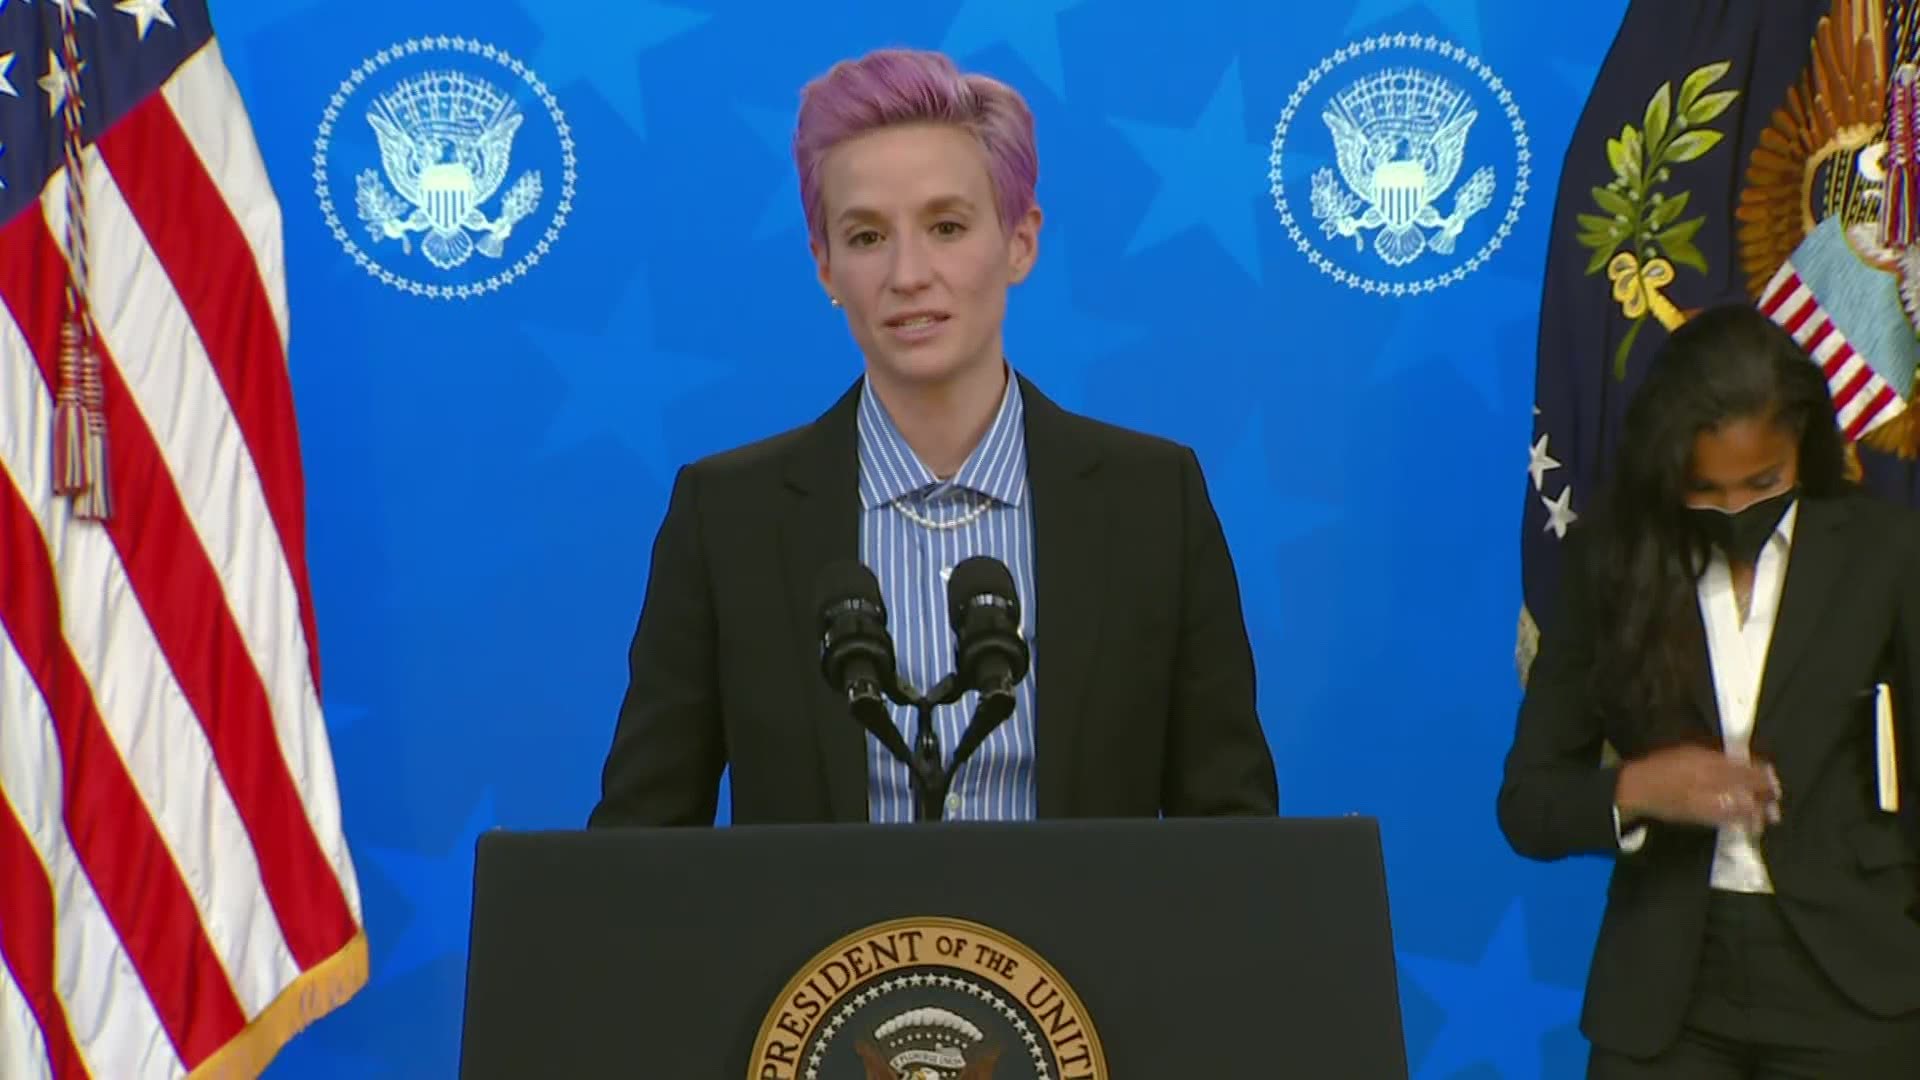 Megan Rapinoe of the U.S. women’s national soccer team took part in a roundtable on Equal Pay Day at The White House.